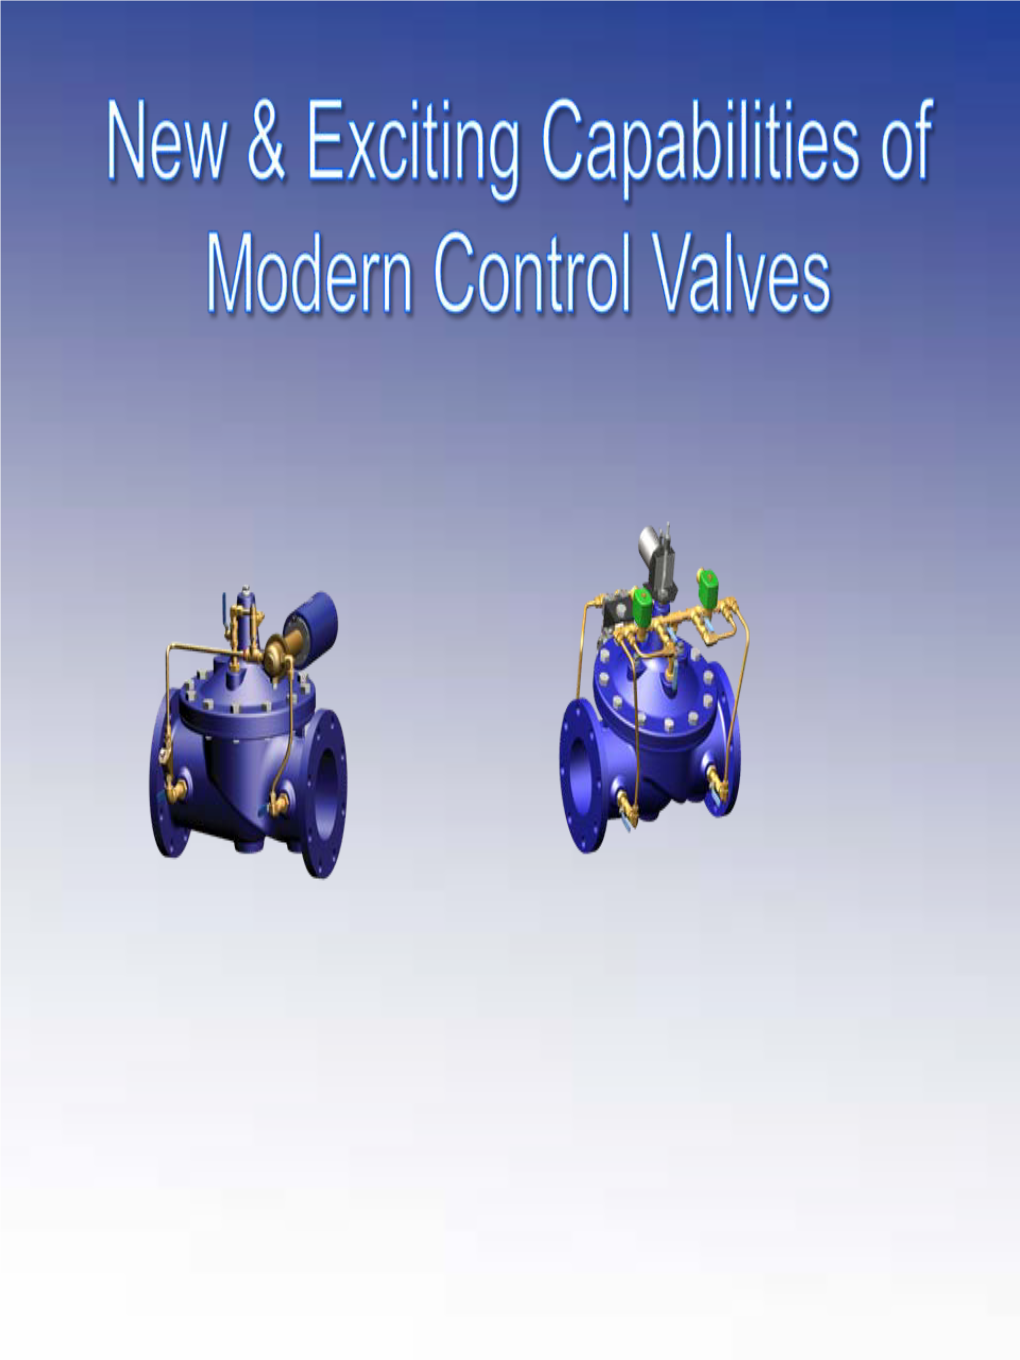 Automatic Control Valve Solutions